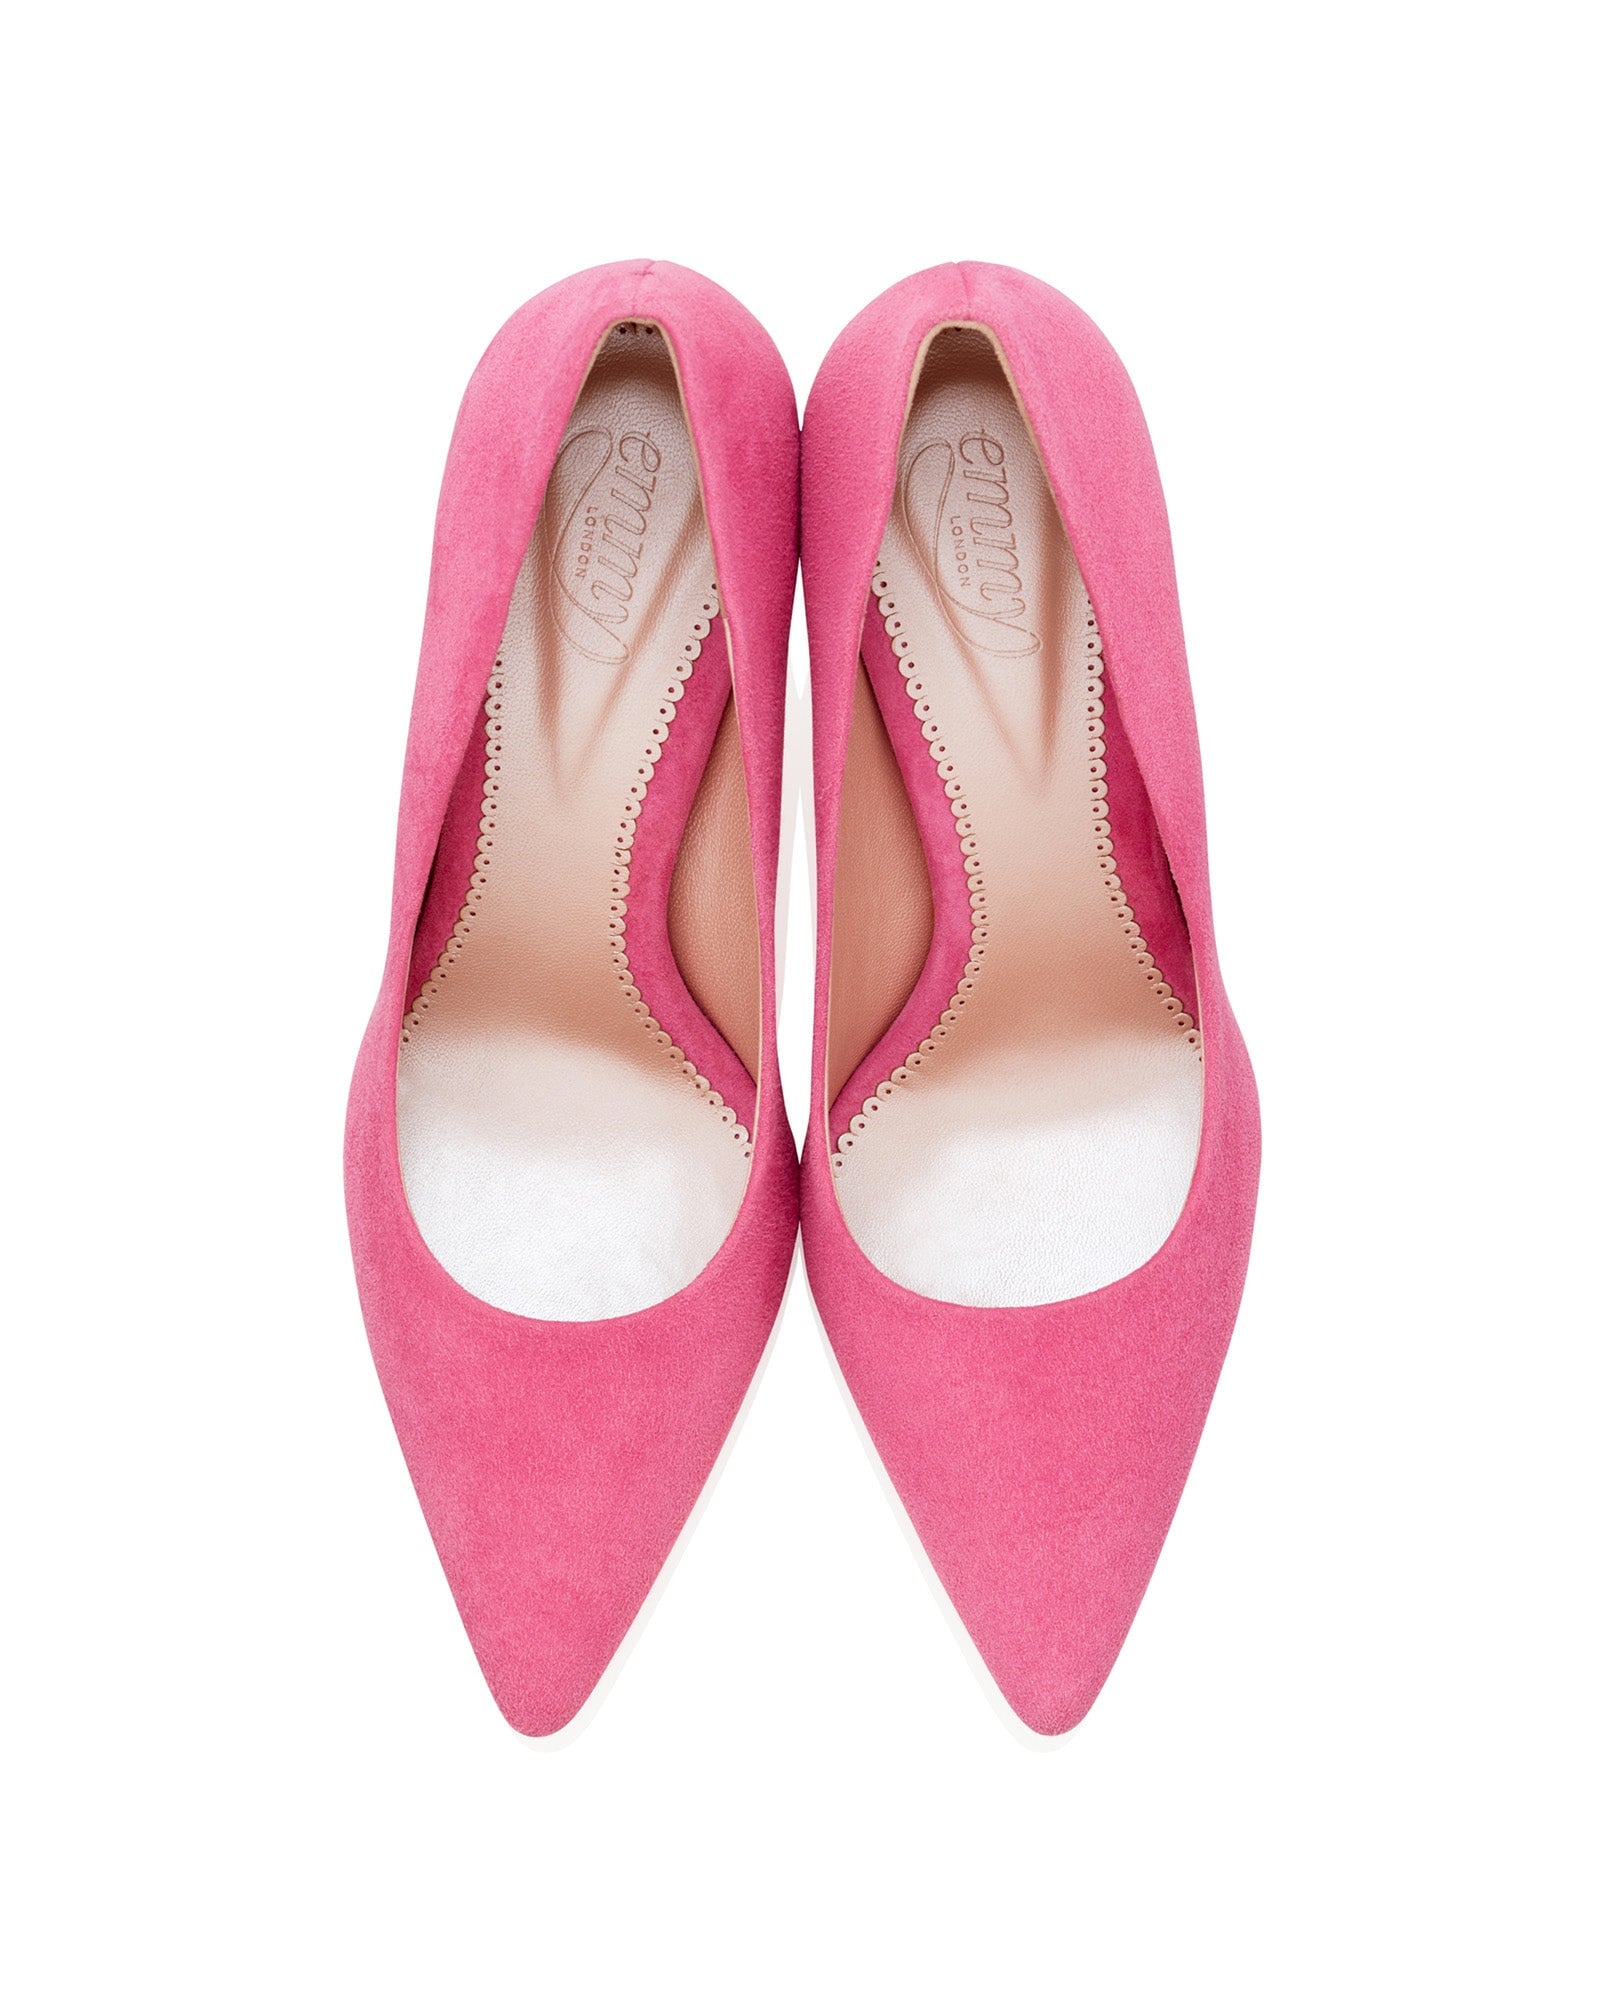 Claudia Cupcake Fashion Shoe Bright Pink Pointed Court Shoe  image